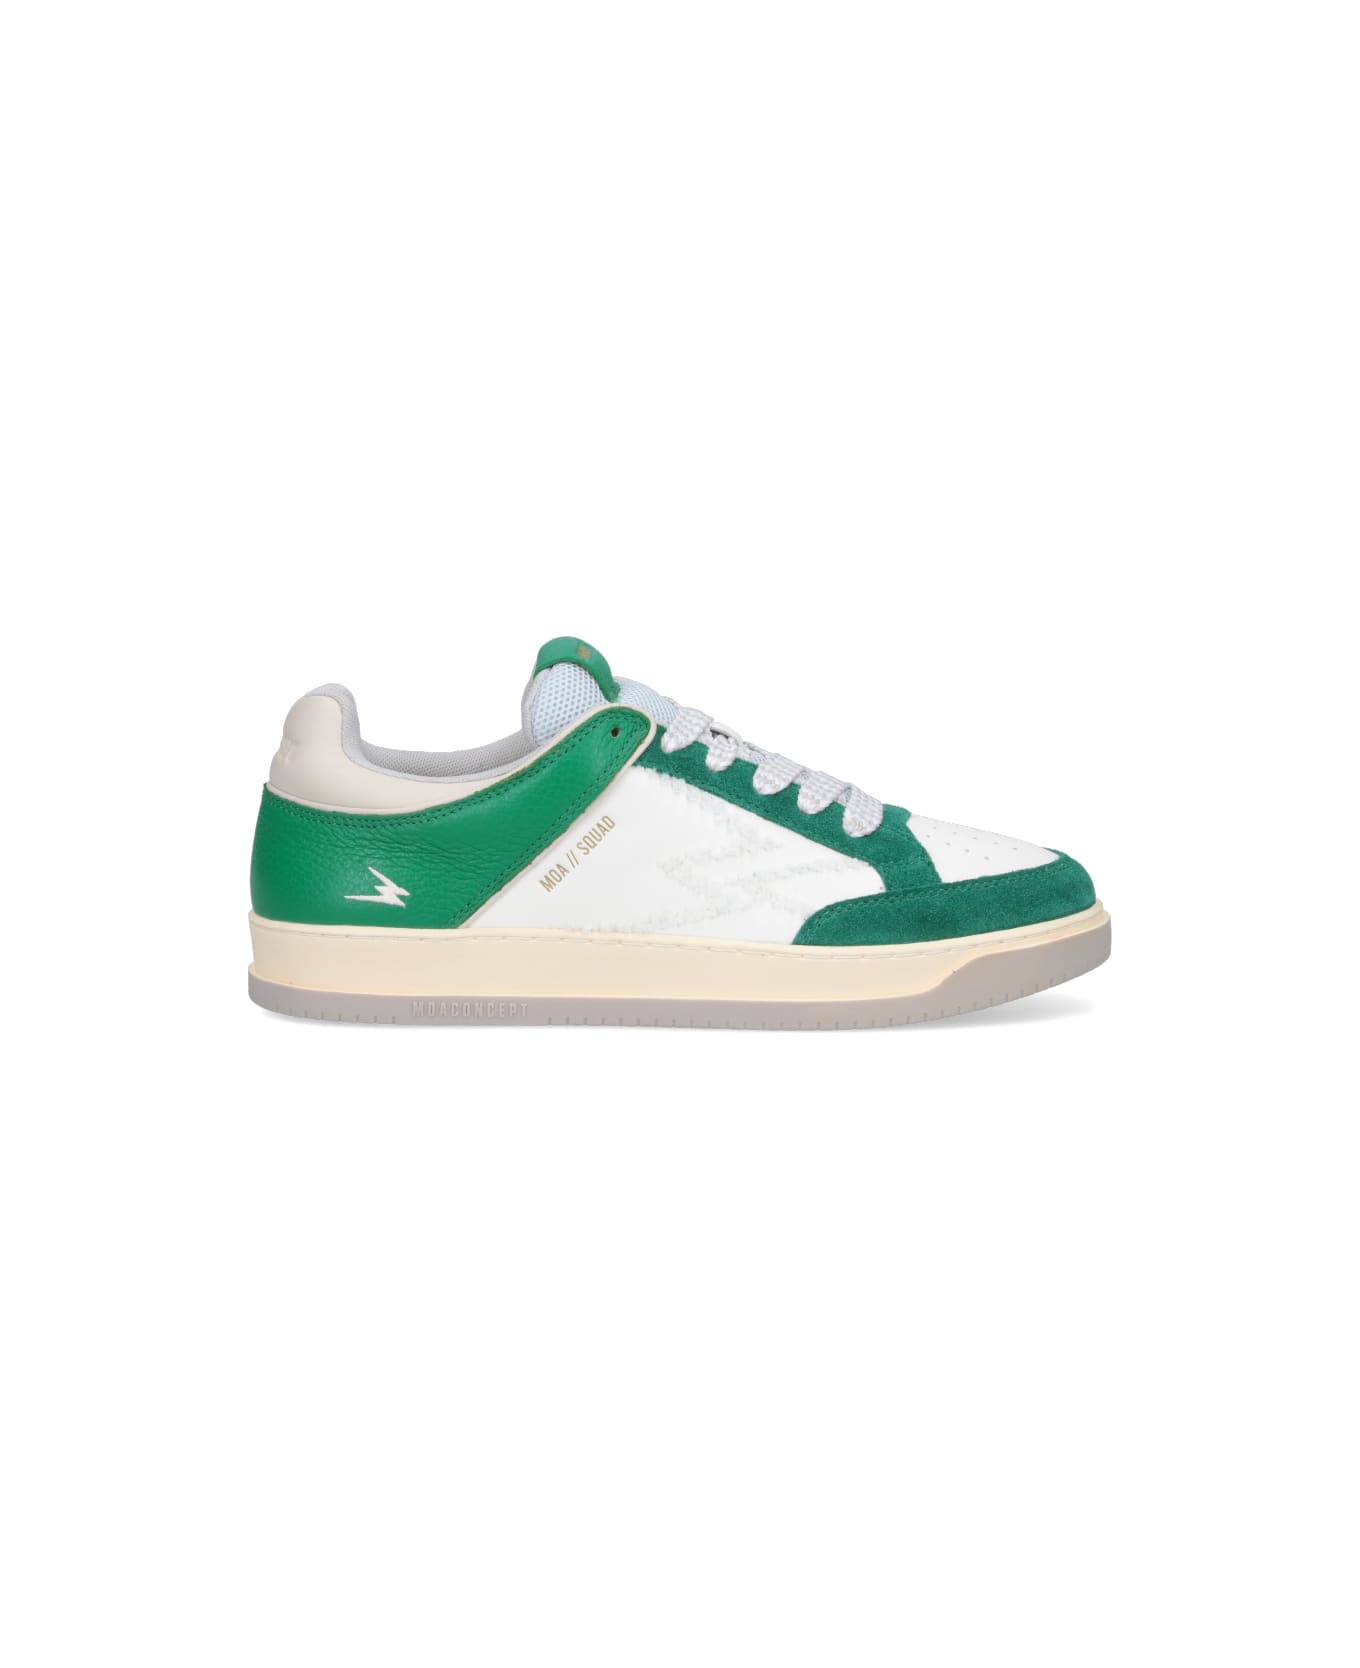 M.O.A. master of arts 'squad' Sneakers - Green スニーカー